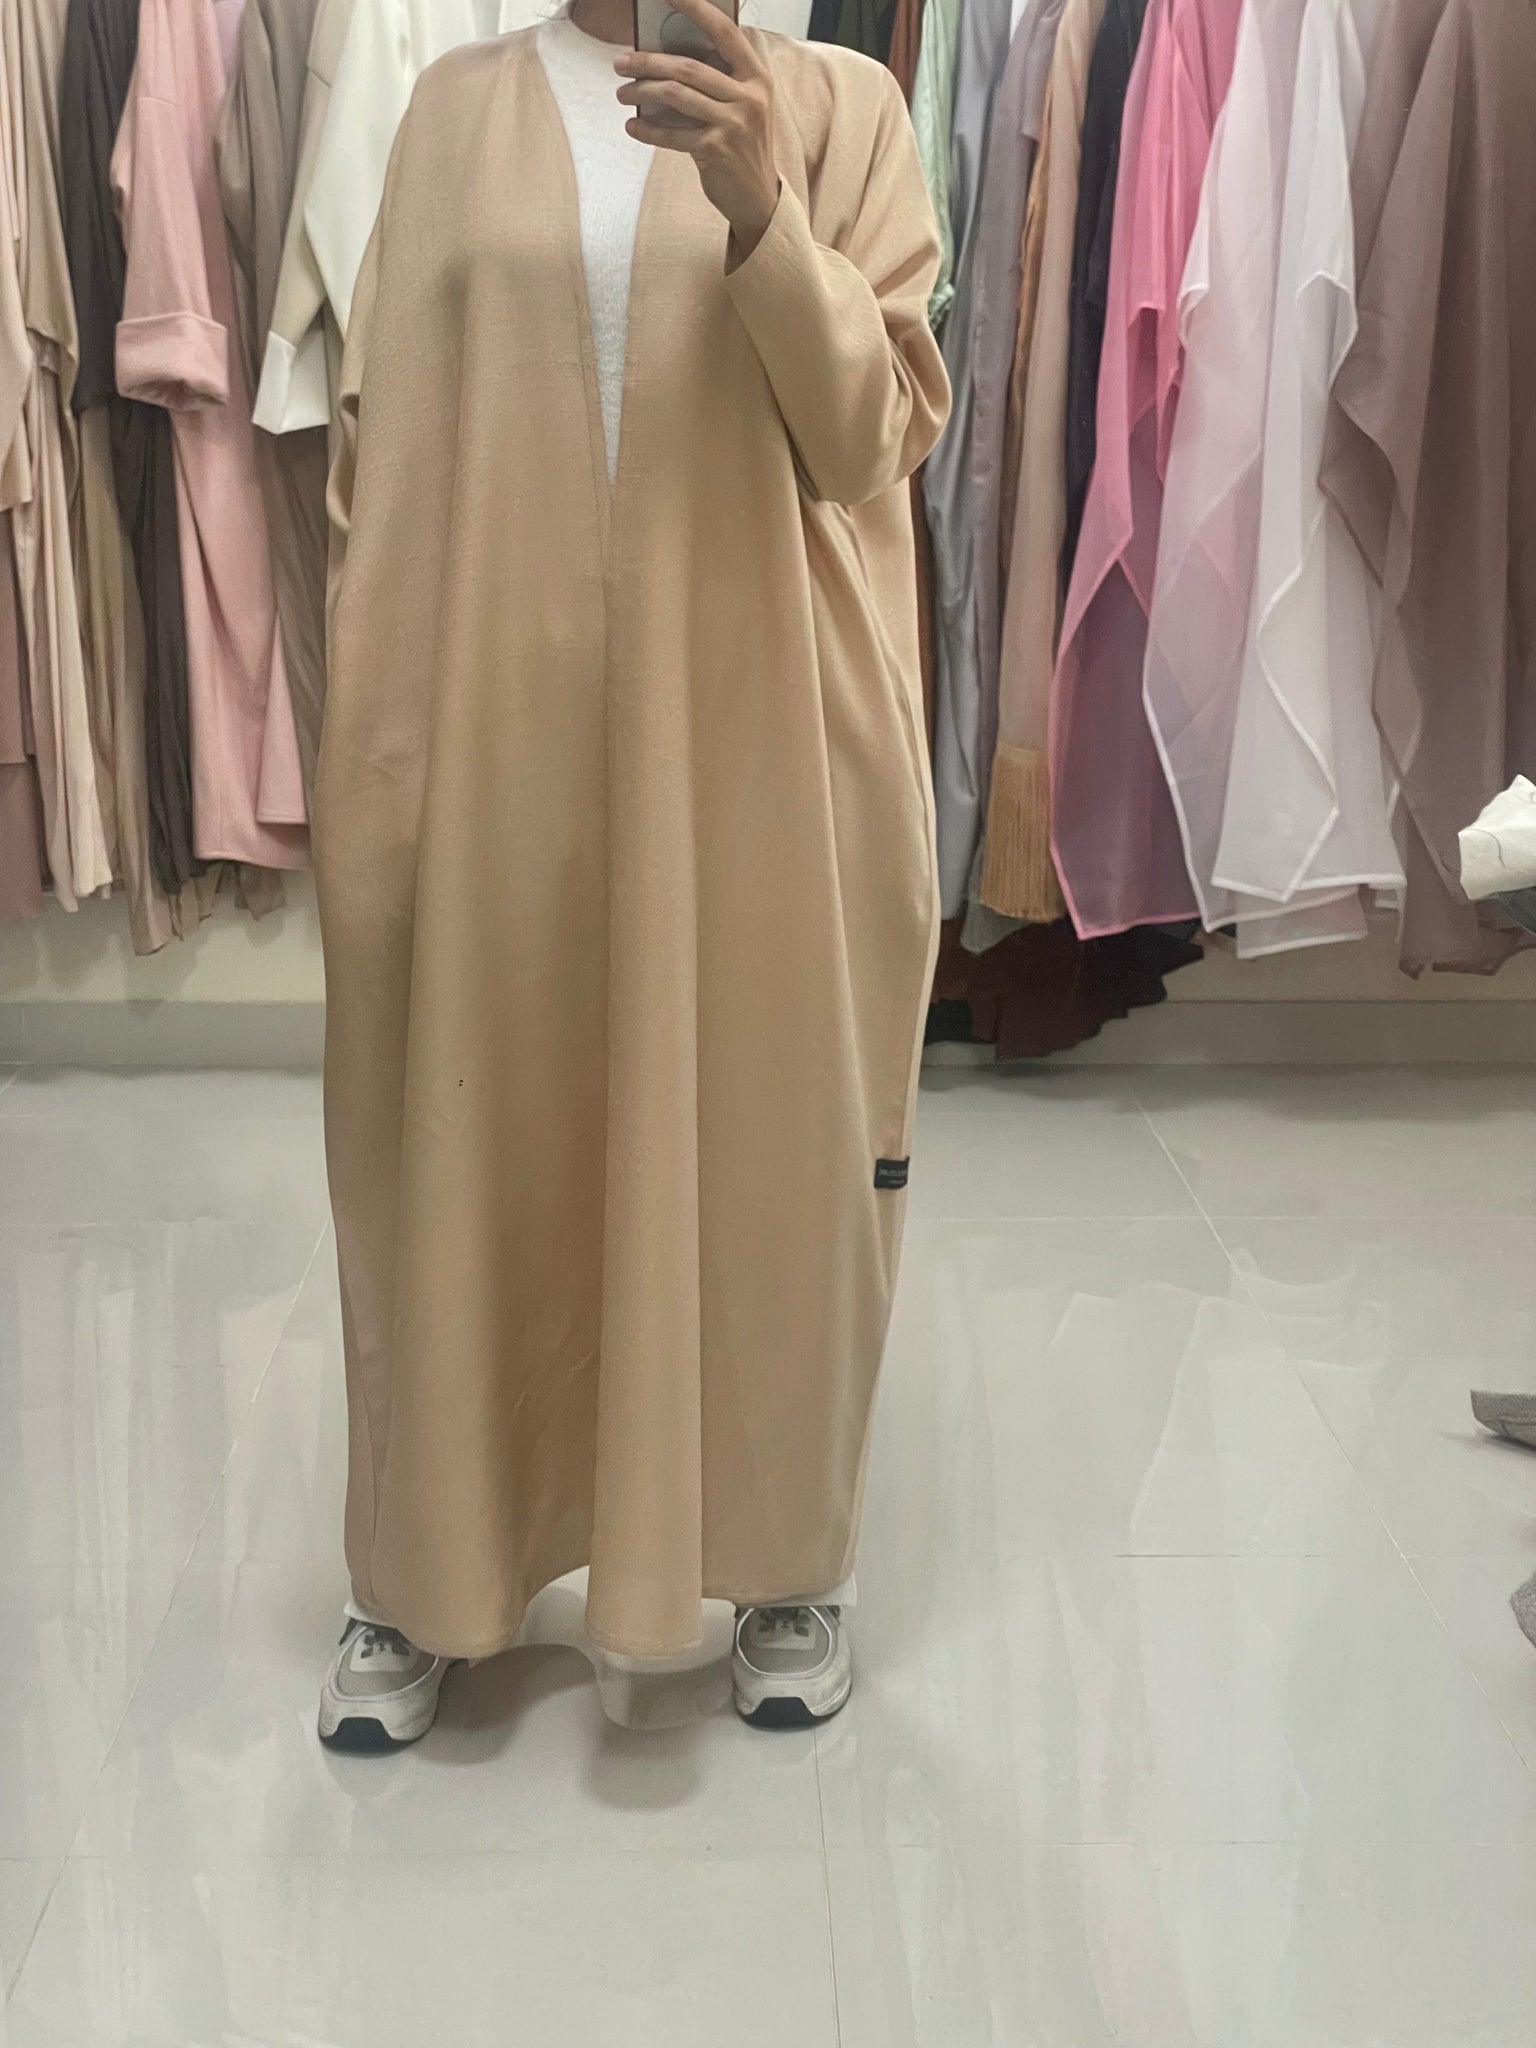 The Casual Beige Jacket Abaya with Pockets - RULACOUTURE 